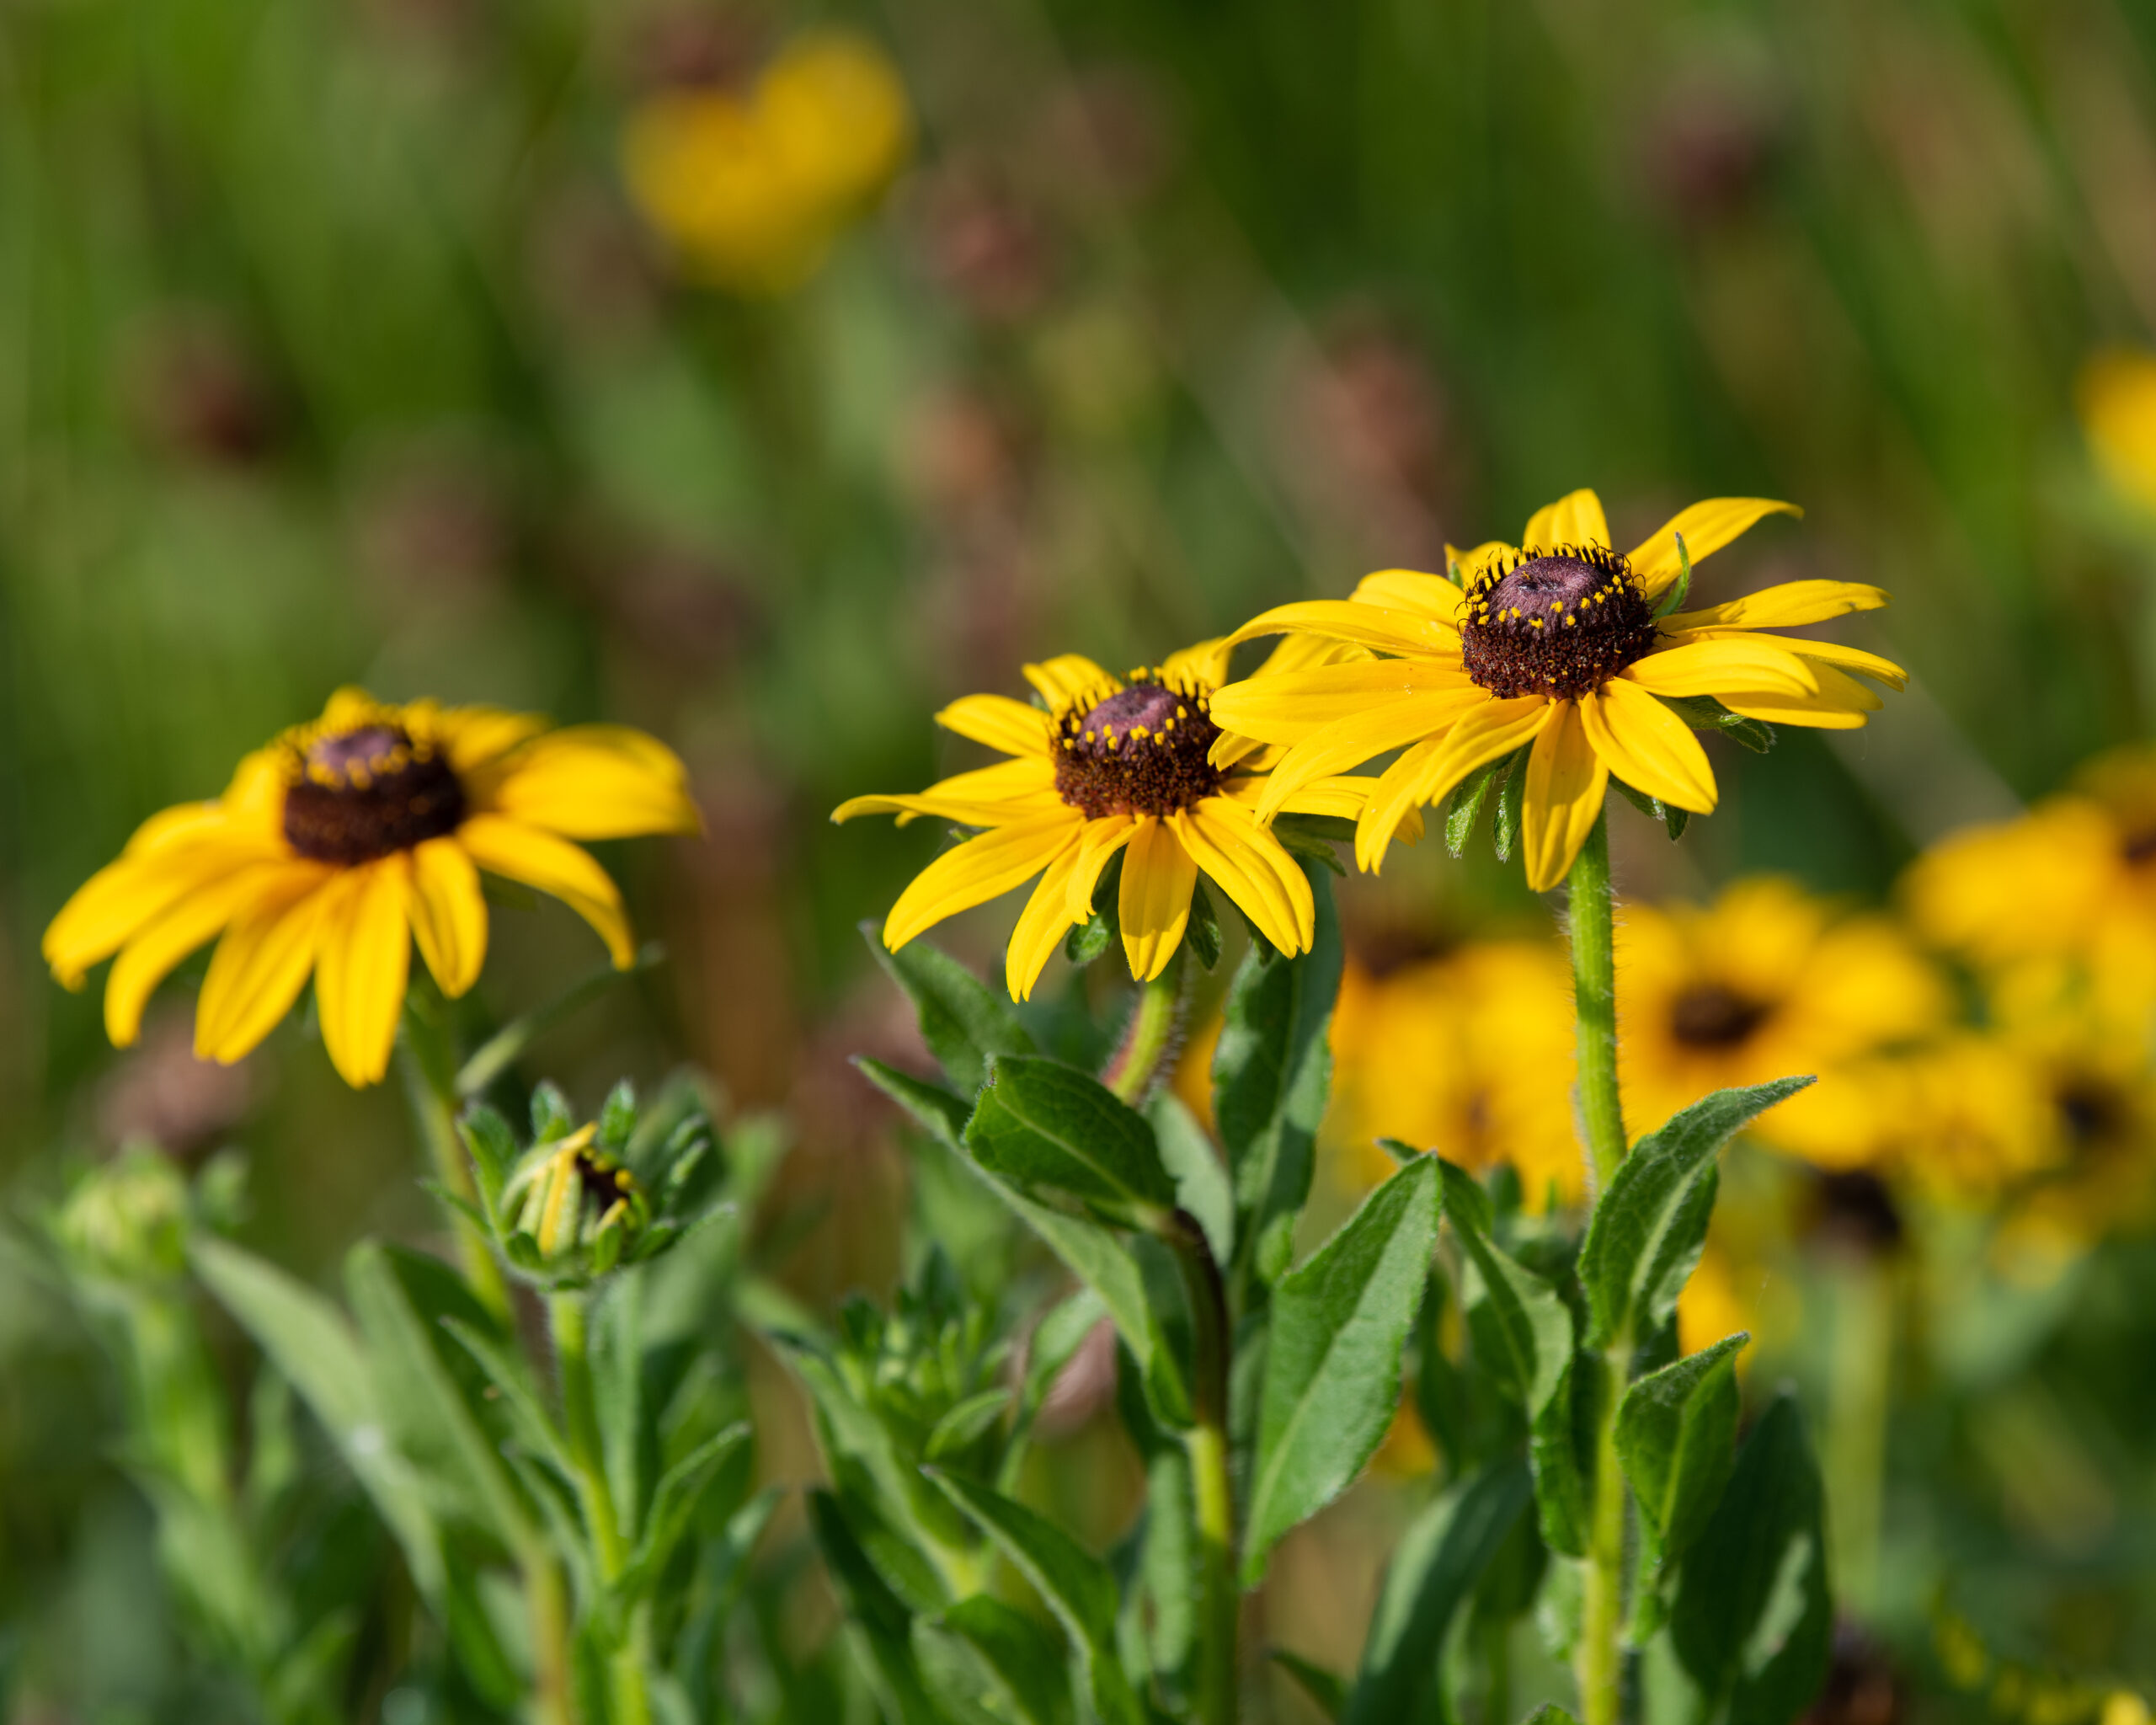 A group of daily-like yellow flowers with brown centers.